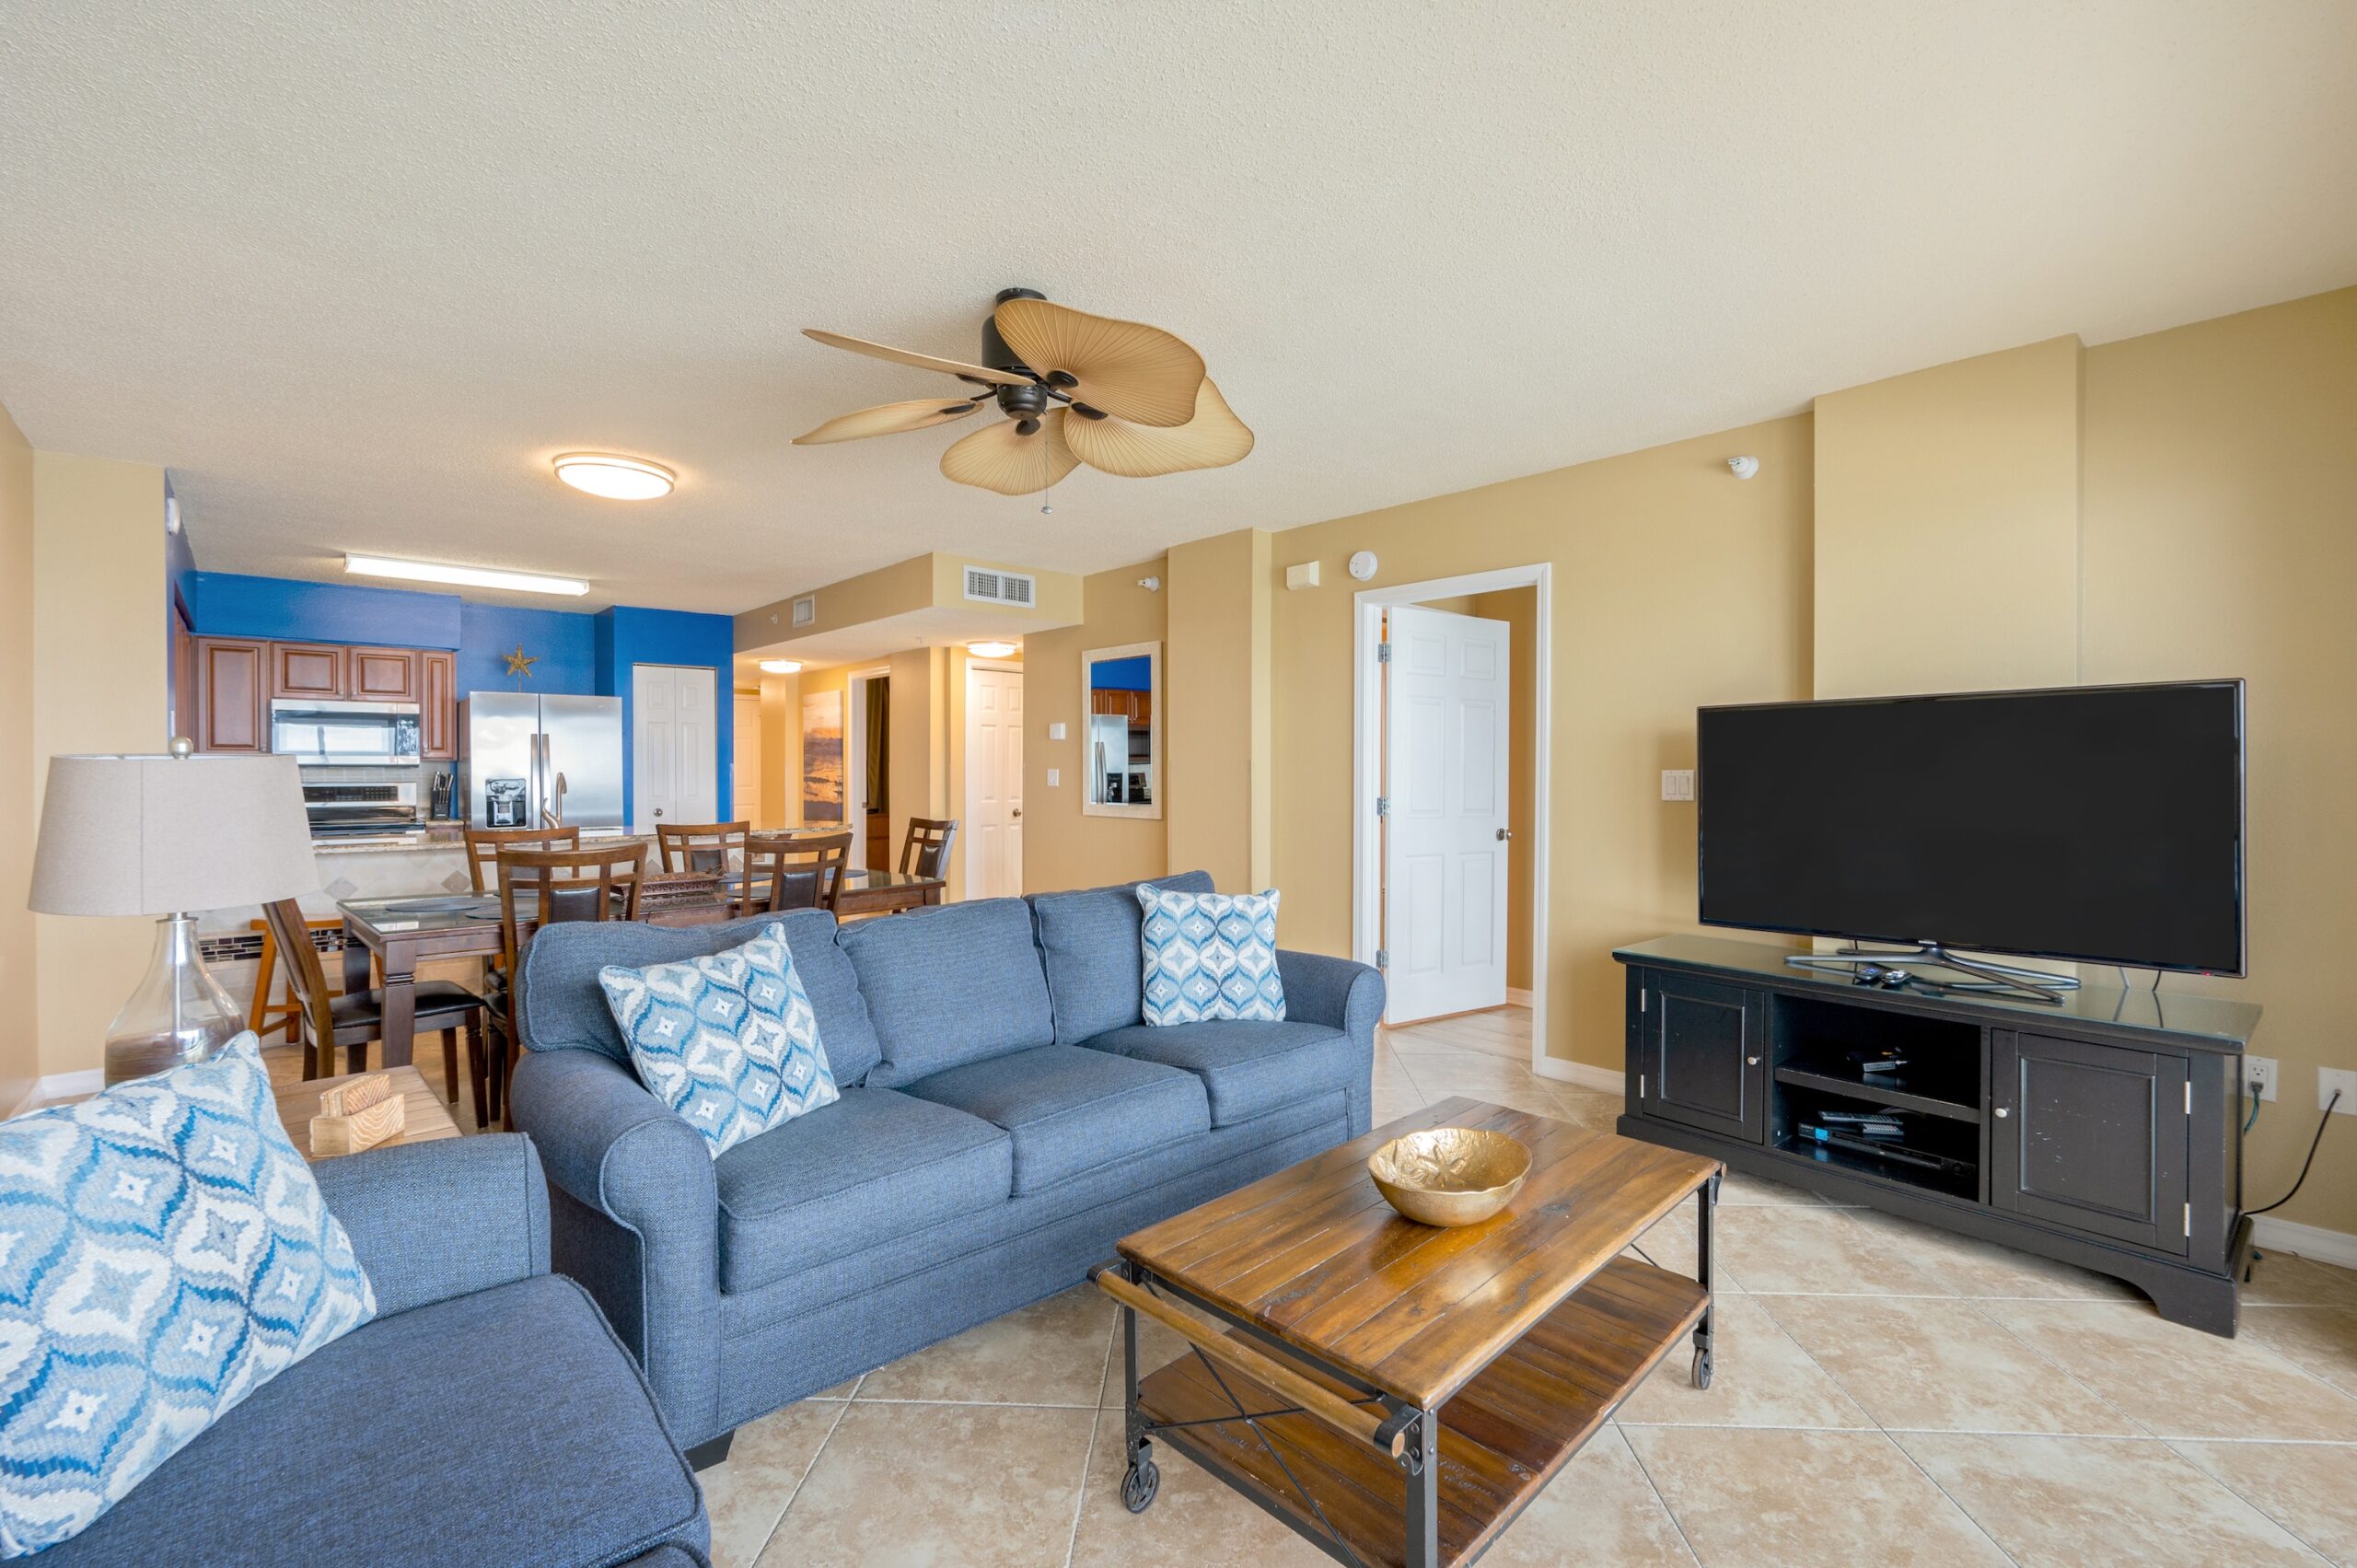 TVs in the living room and each bedroom in our Okaloosa Beach condo